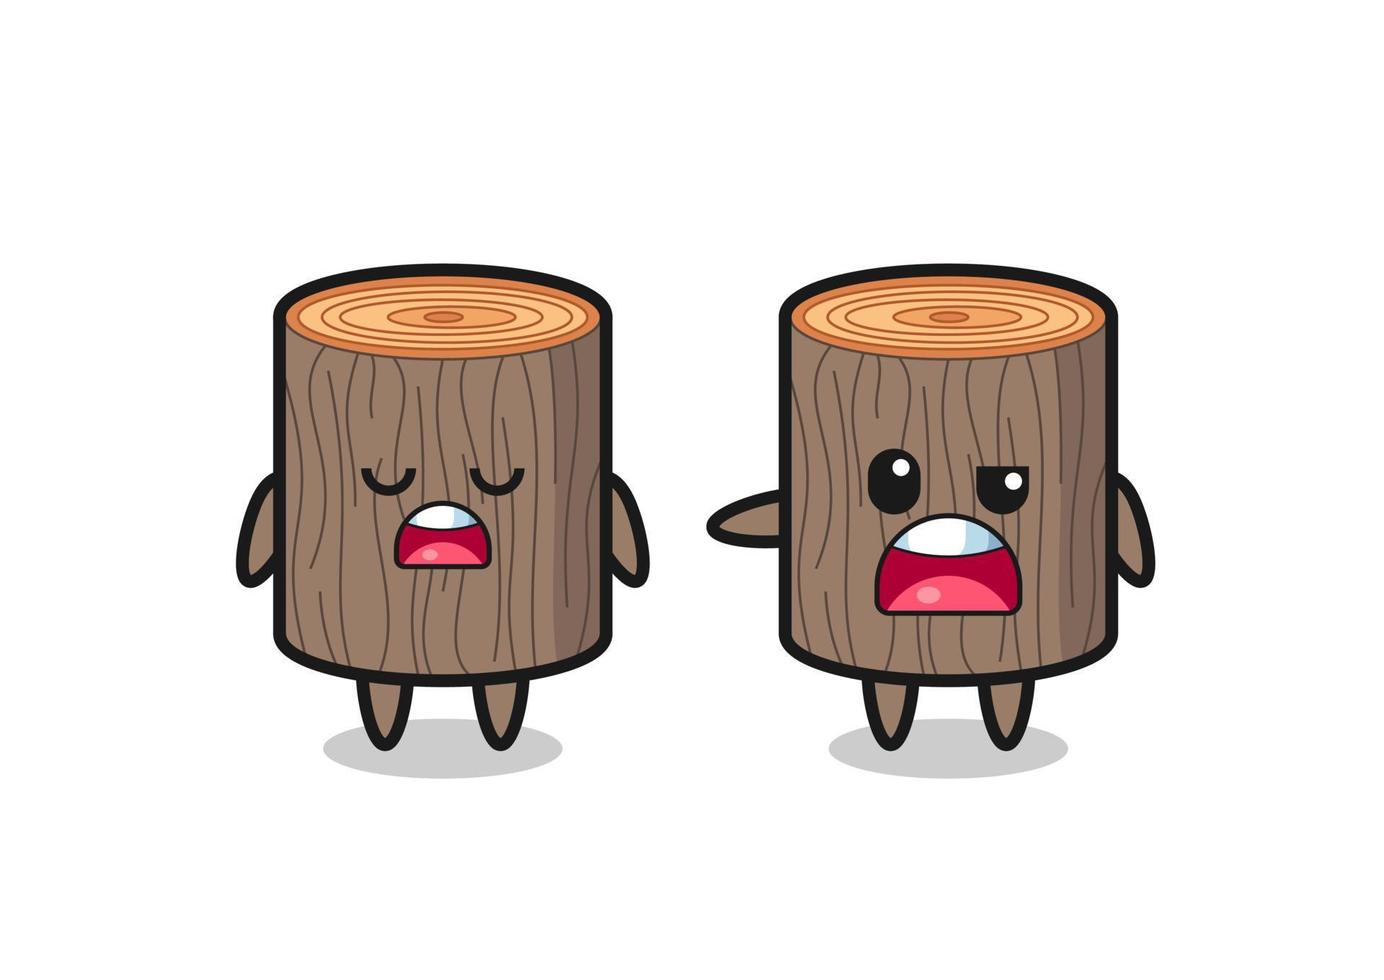 illustration of the argue between two cute tree stump characters vector